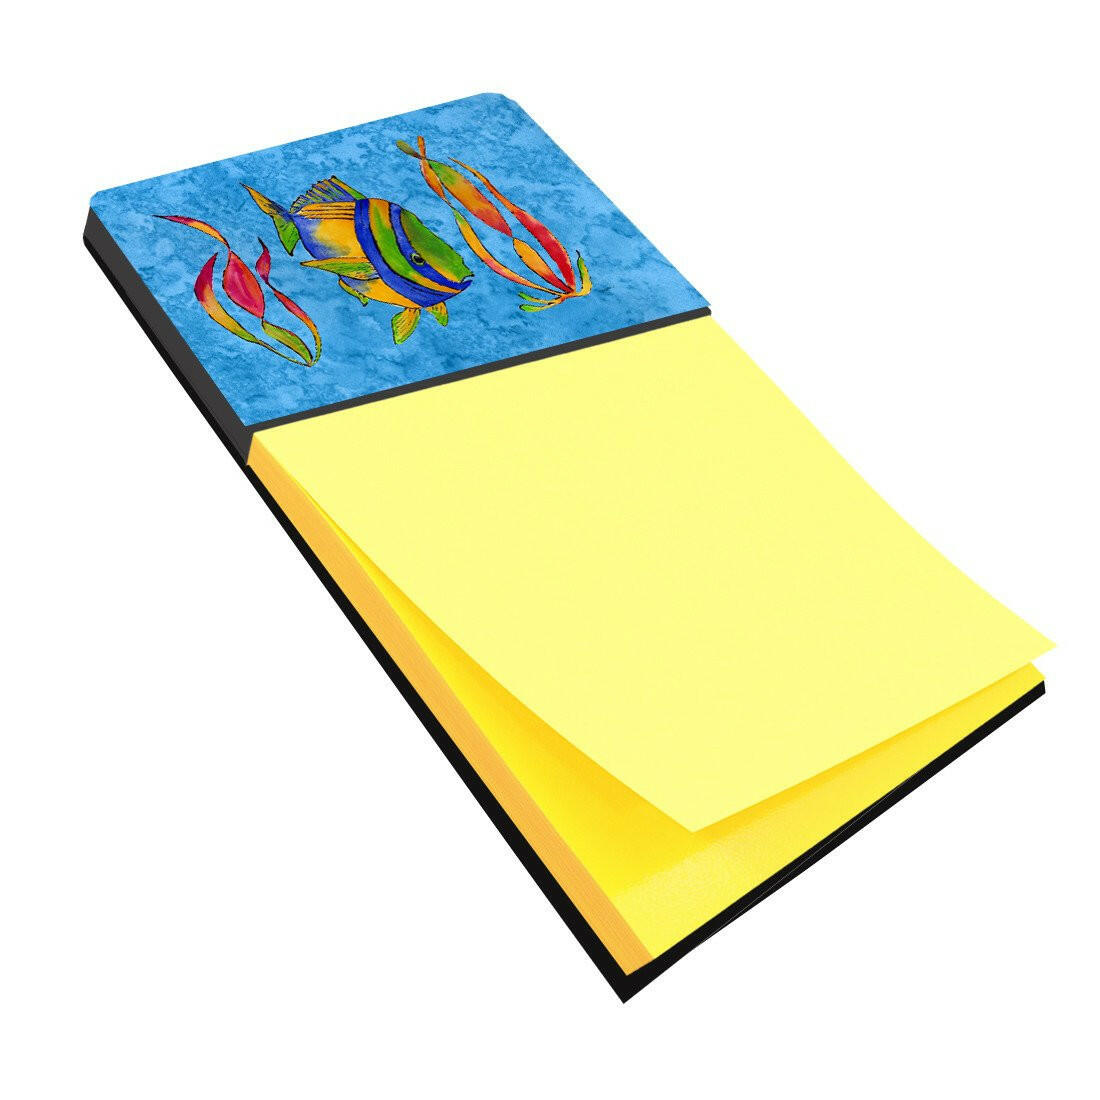 Troical Fish and Seaweed on Blue Sticky Note Holder 8713SN by Caroline's Treasures